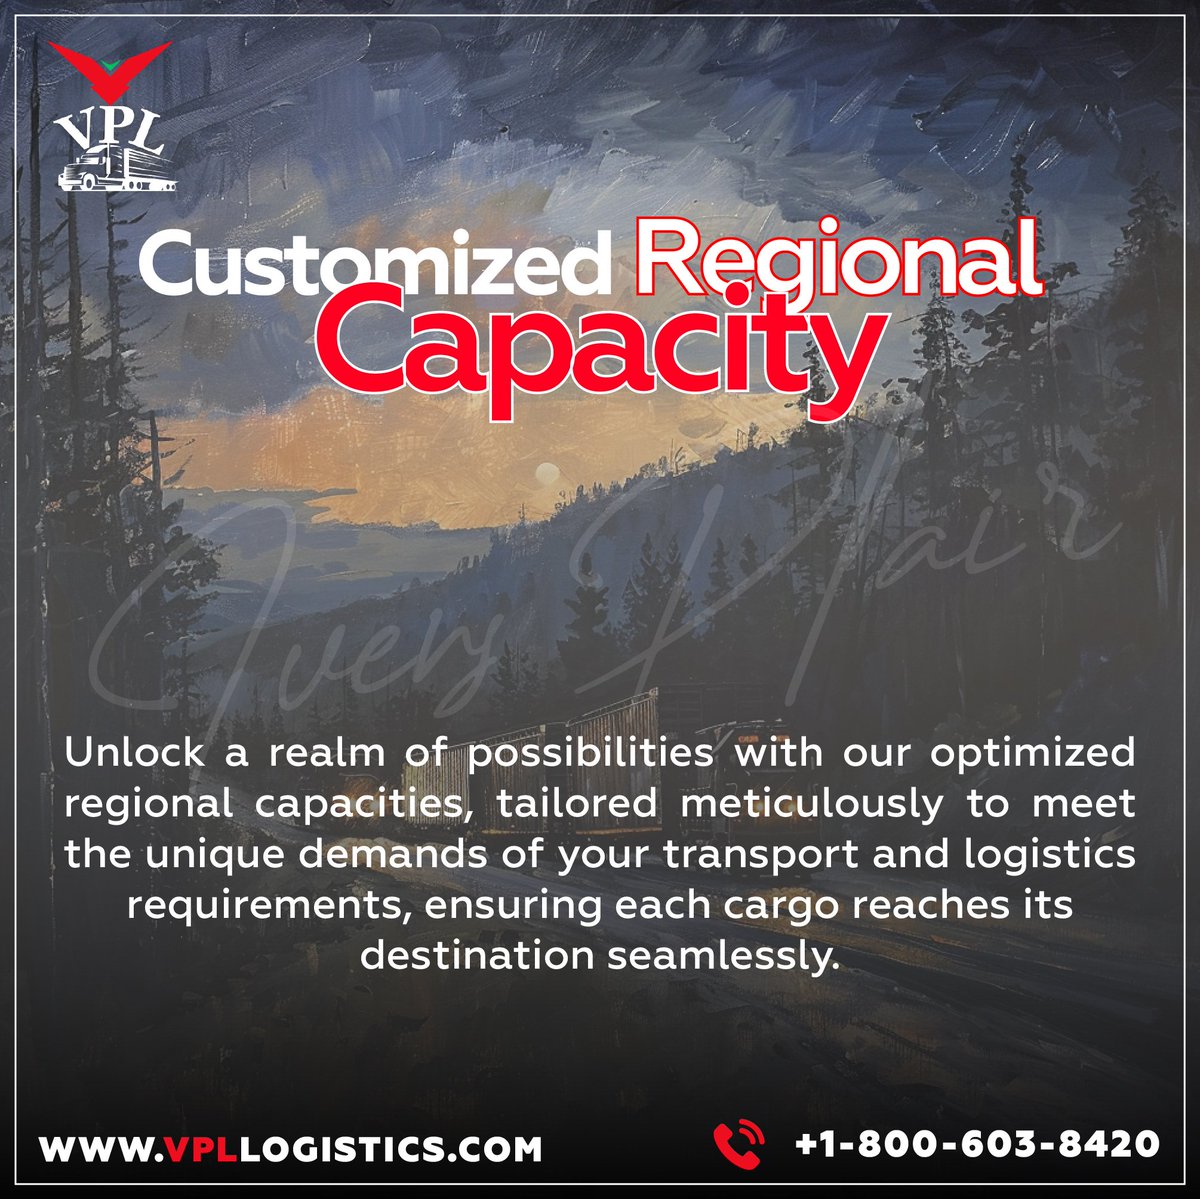 Customized Regional Capacity

Unlock a realm of possibilities with our optimized regional capacities.

#vensplailogistics #freightagent #trucking